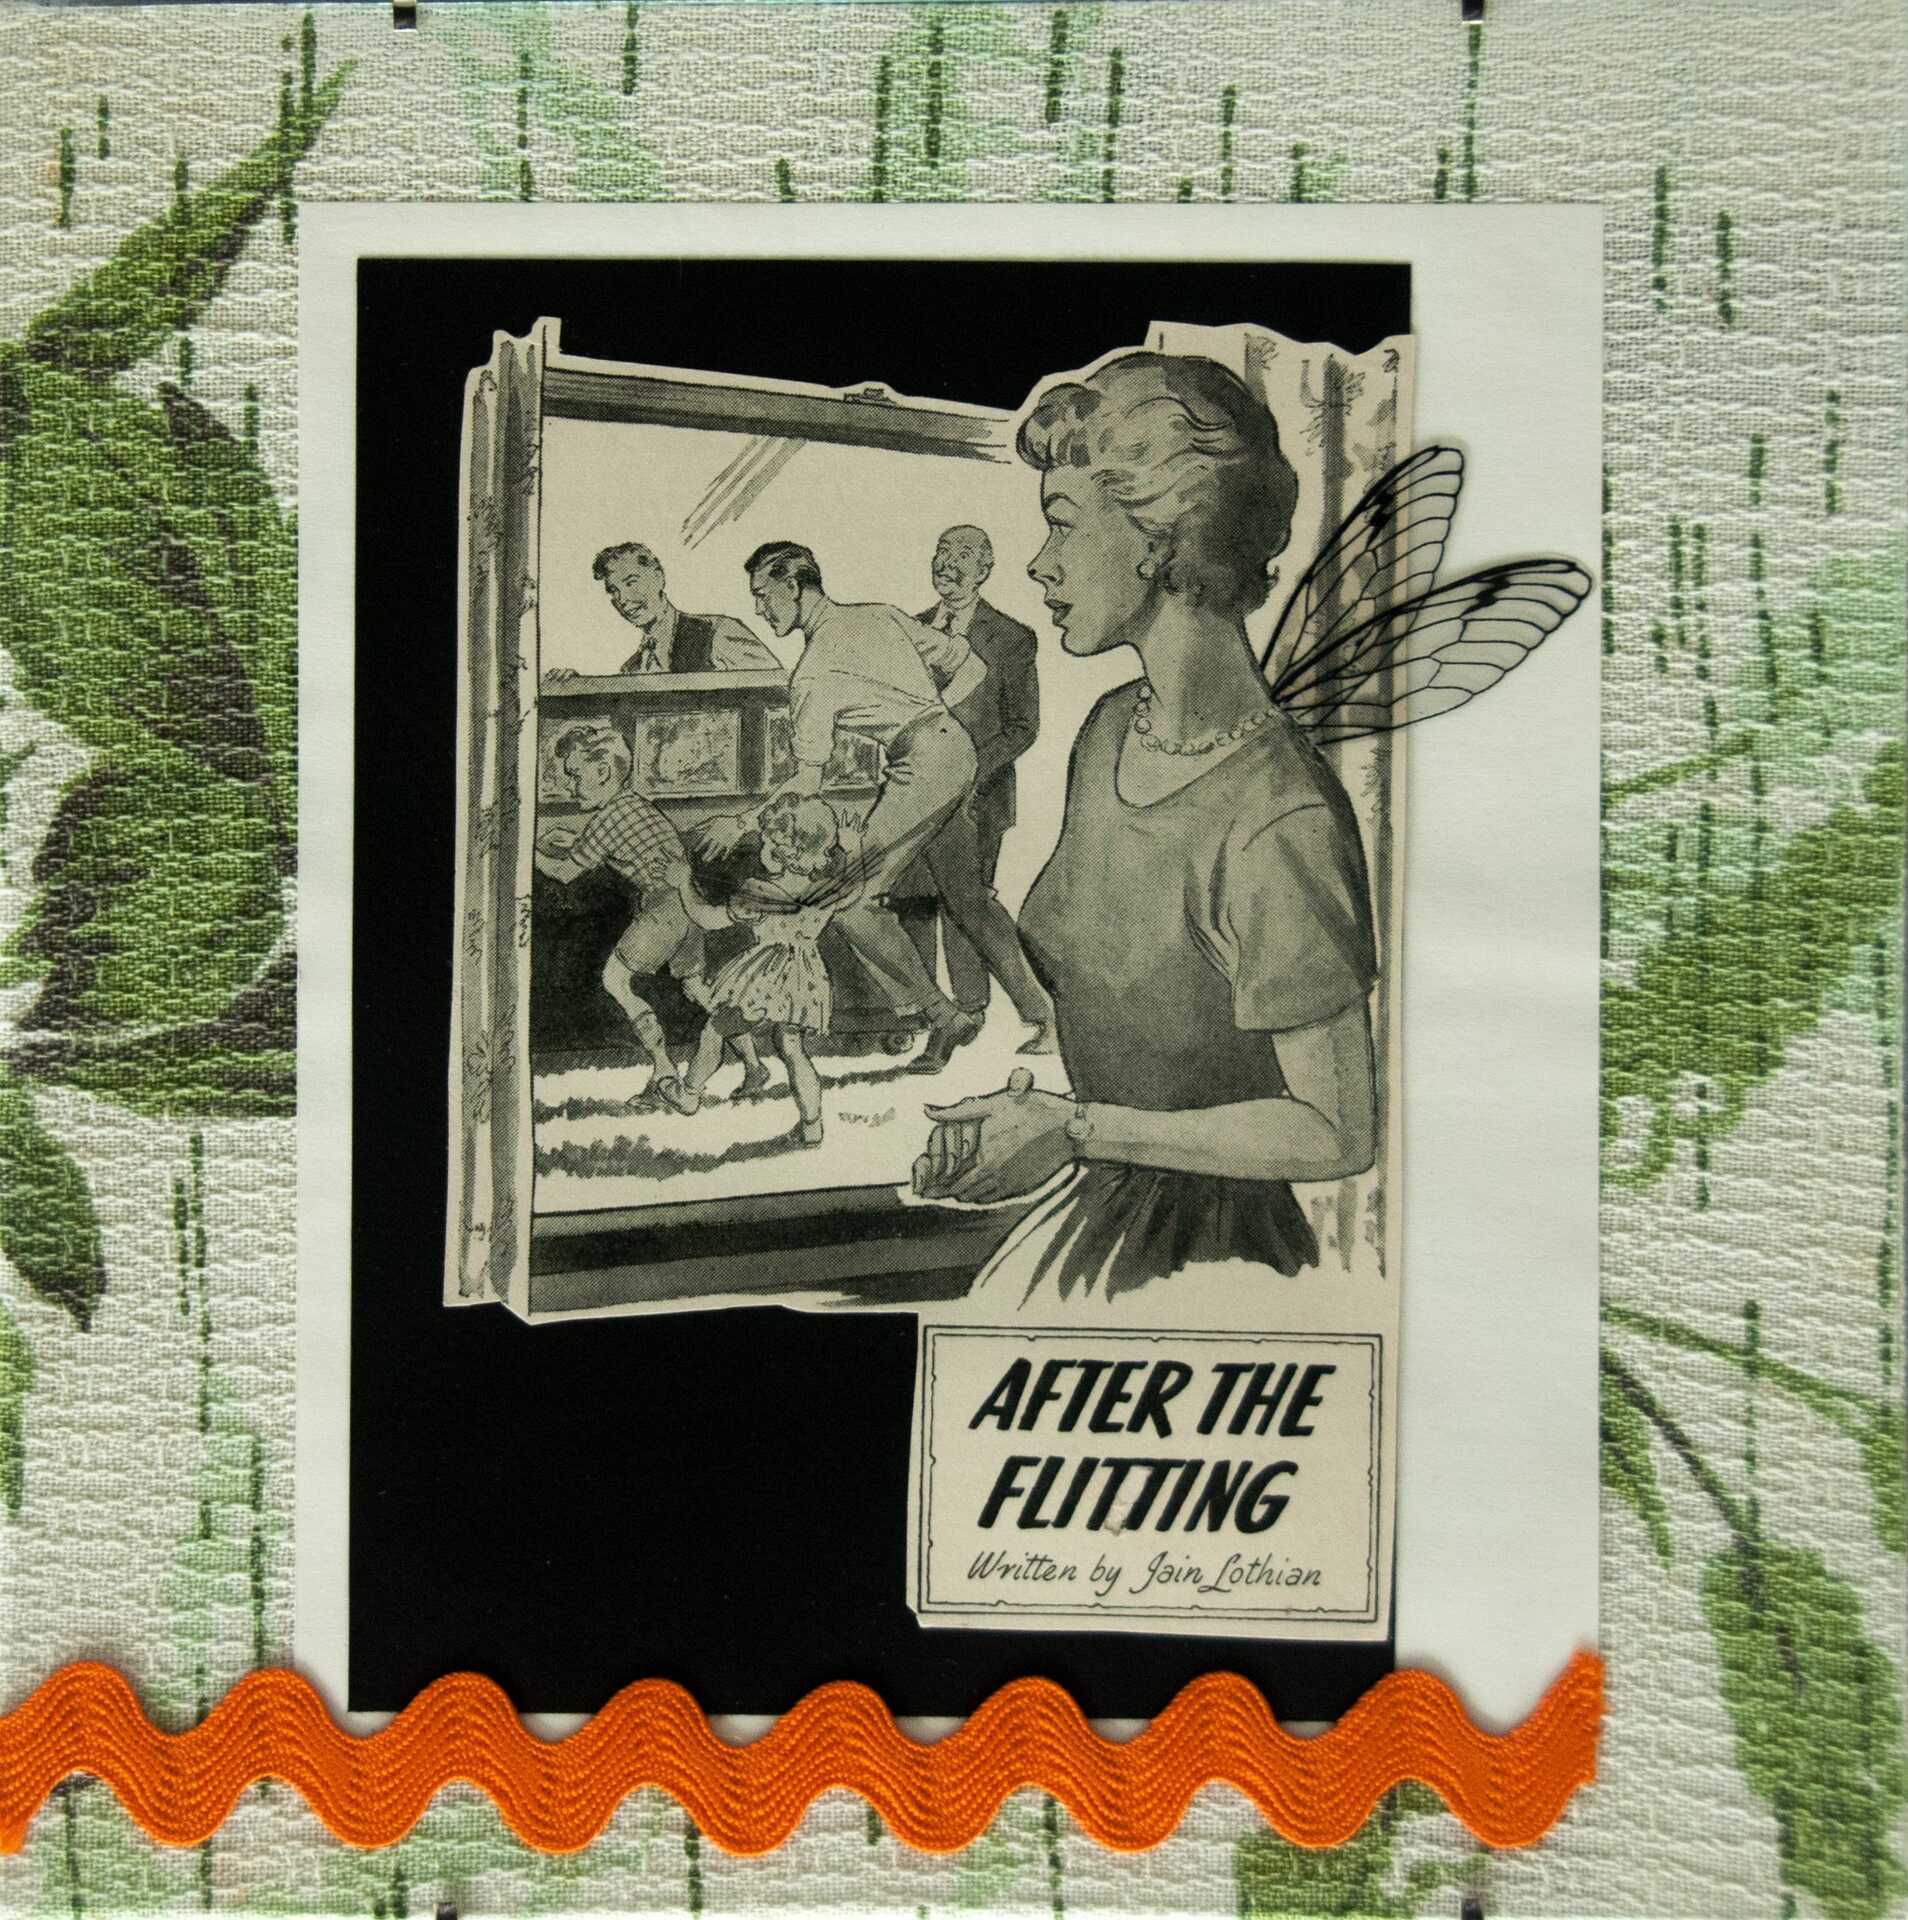 "After the Flitting" by Libby Bloxham. A vintage book illustration is layered over monochrome card and vintage greenery-printed fabric with orange braid, to create a square collage. The illustration depicts a woman smiling as she watches, through a window, several men moving a piano outside. A small boy appears to be helping them move, while a small girl stands by. The printed title reads 'After the Flitting by Jain Lothian'. Acetate insect wings have been added to the woman and girl child.